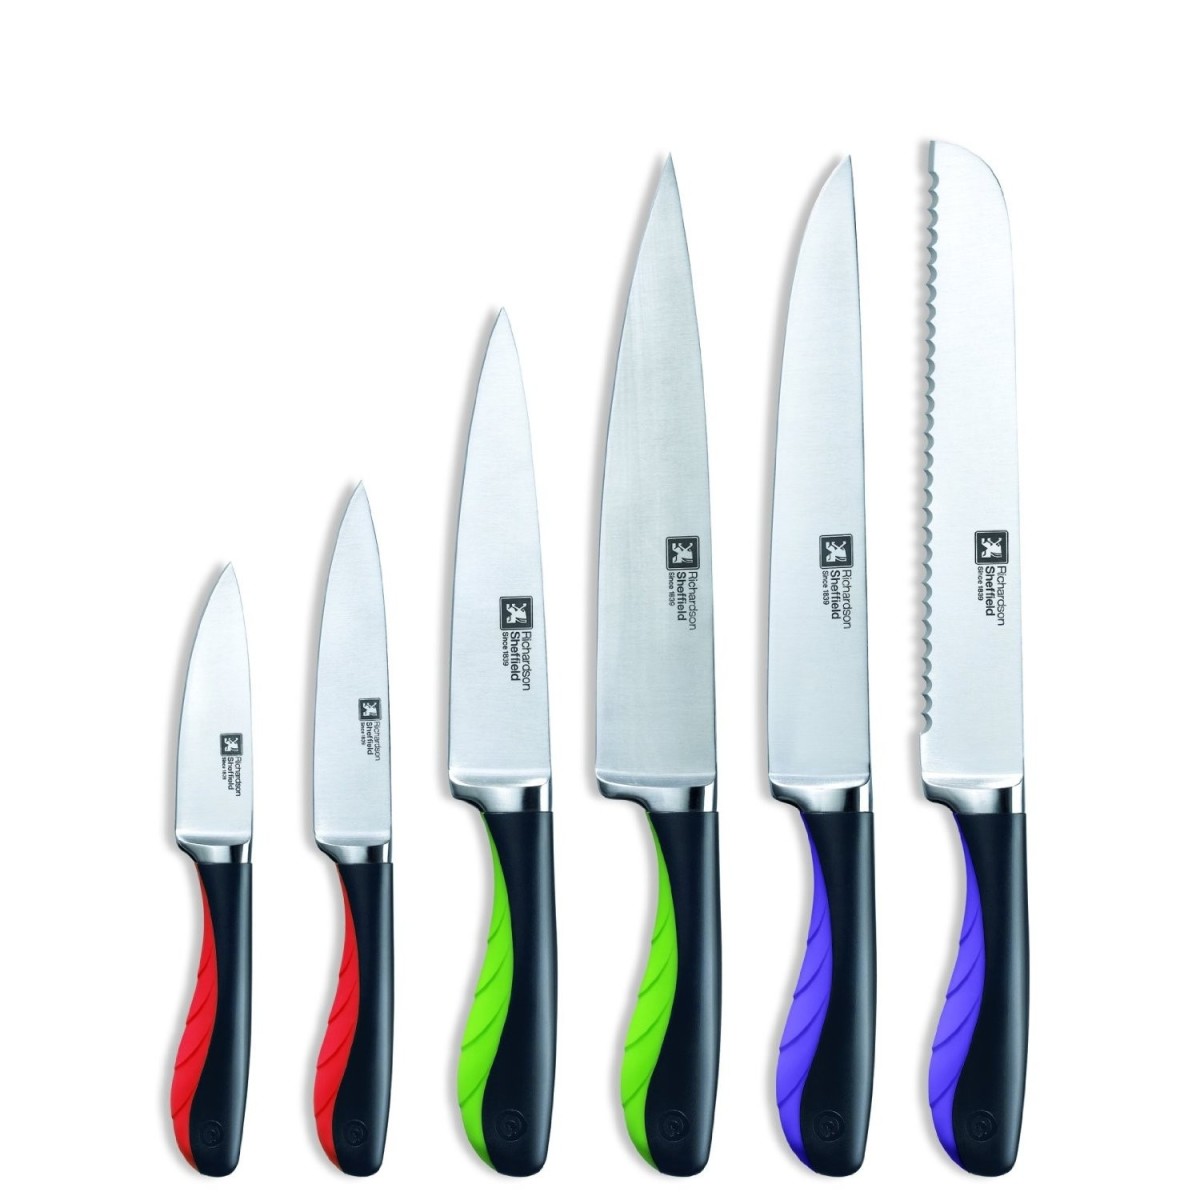 Gripi knives, designed with an easy-grip handle